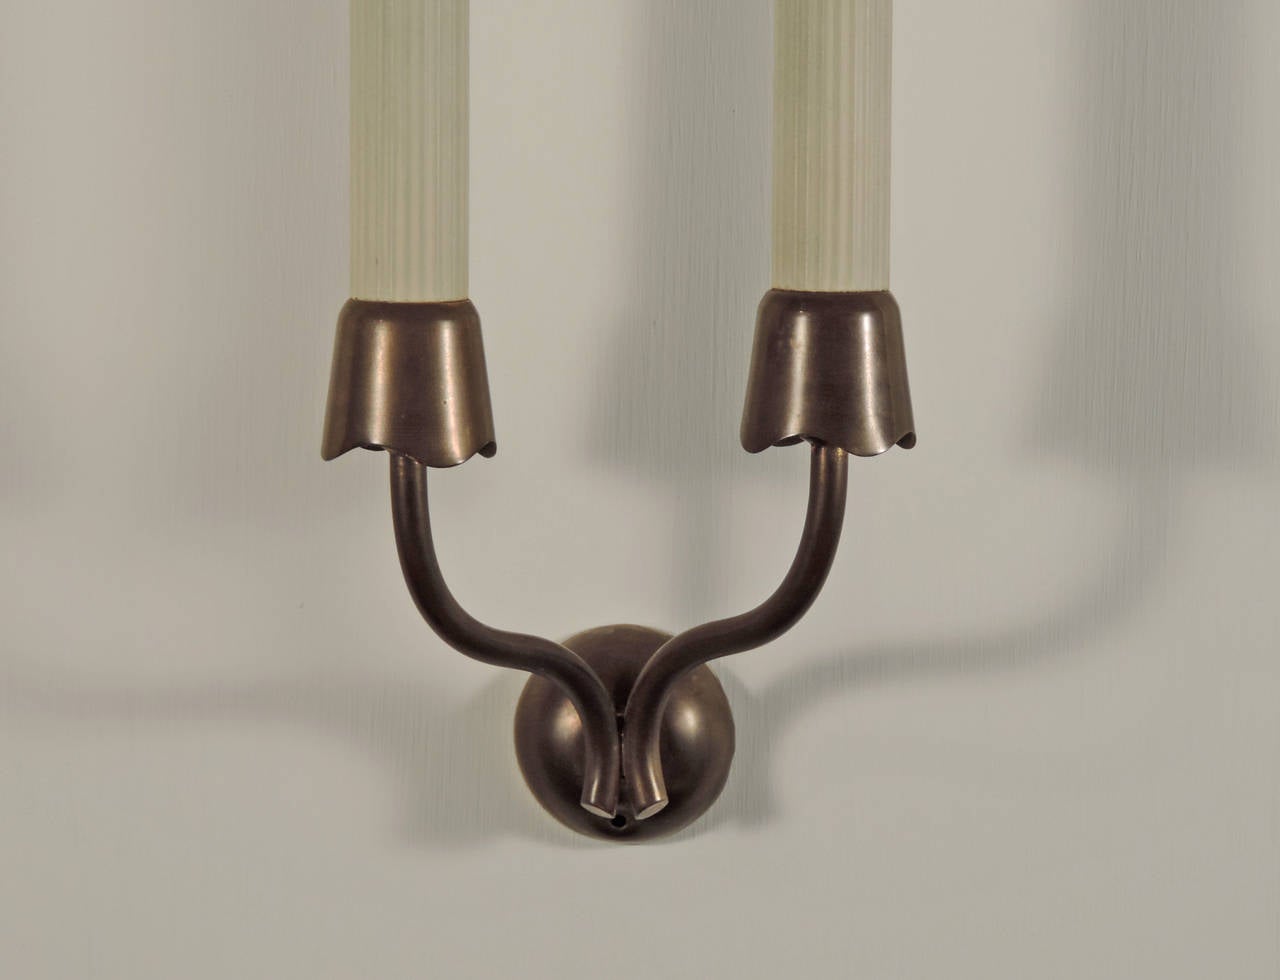 Rare and early Gino Sarfatti model 144 wall lights for Arteluce.

Reference: Gino Sarfatti, selected works 1938-1973. p.398.